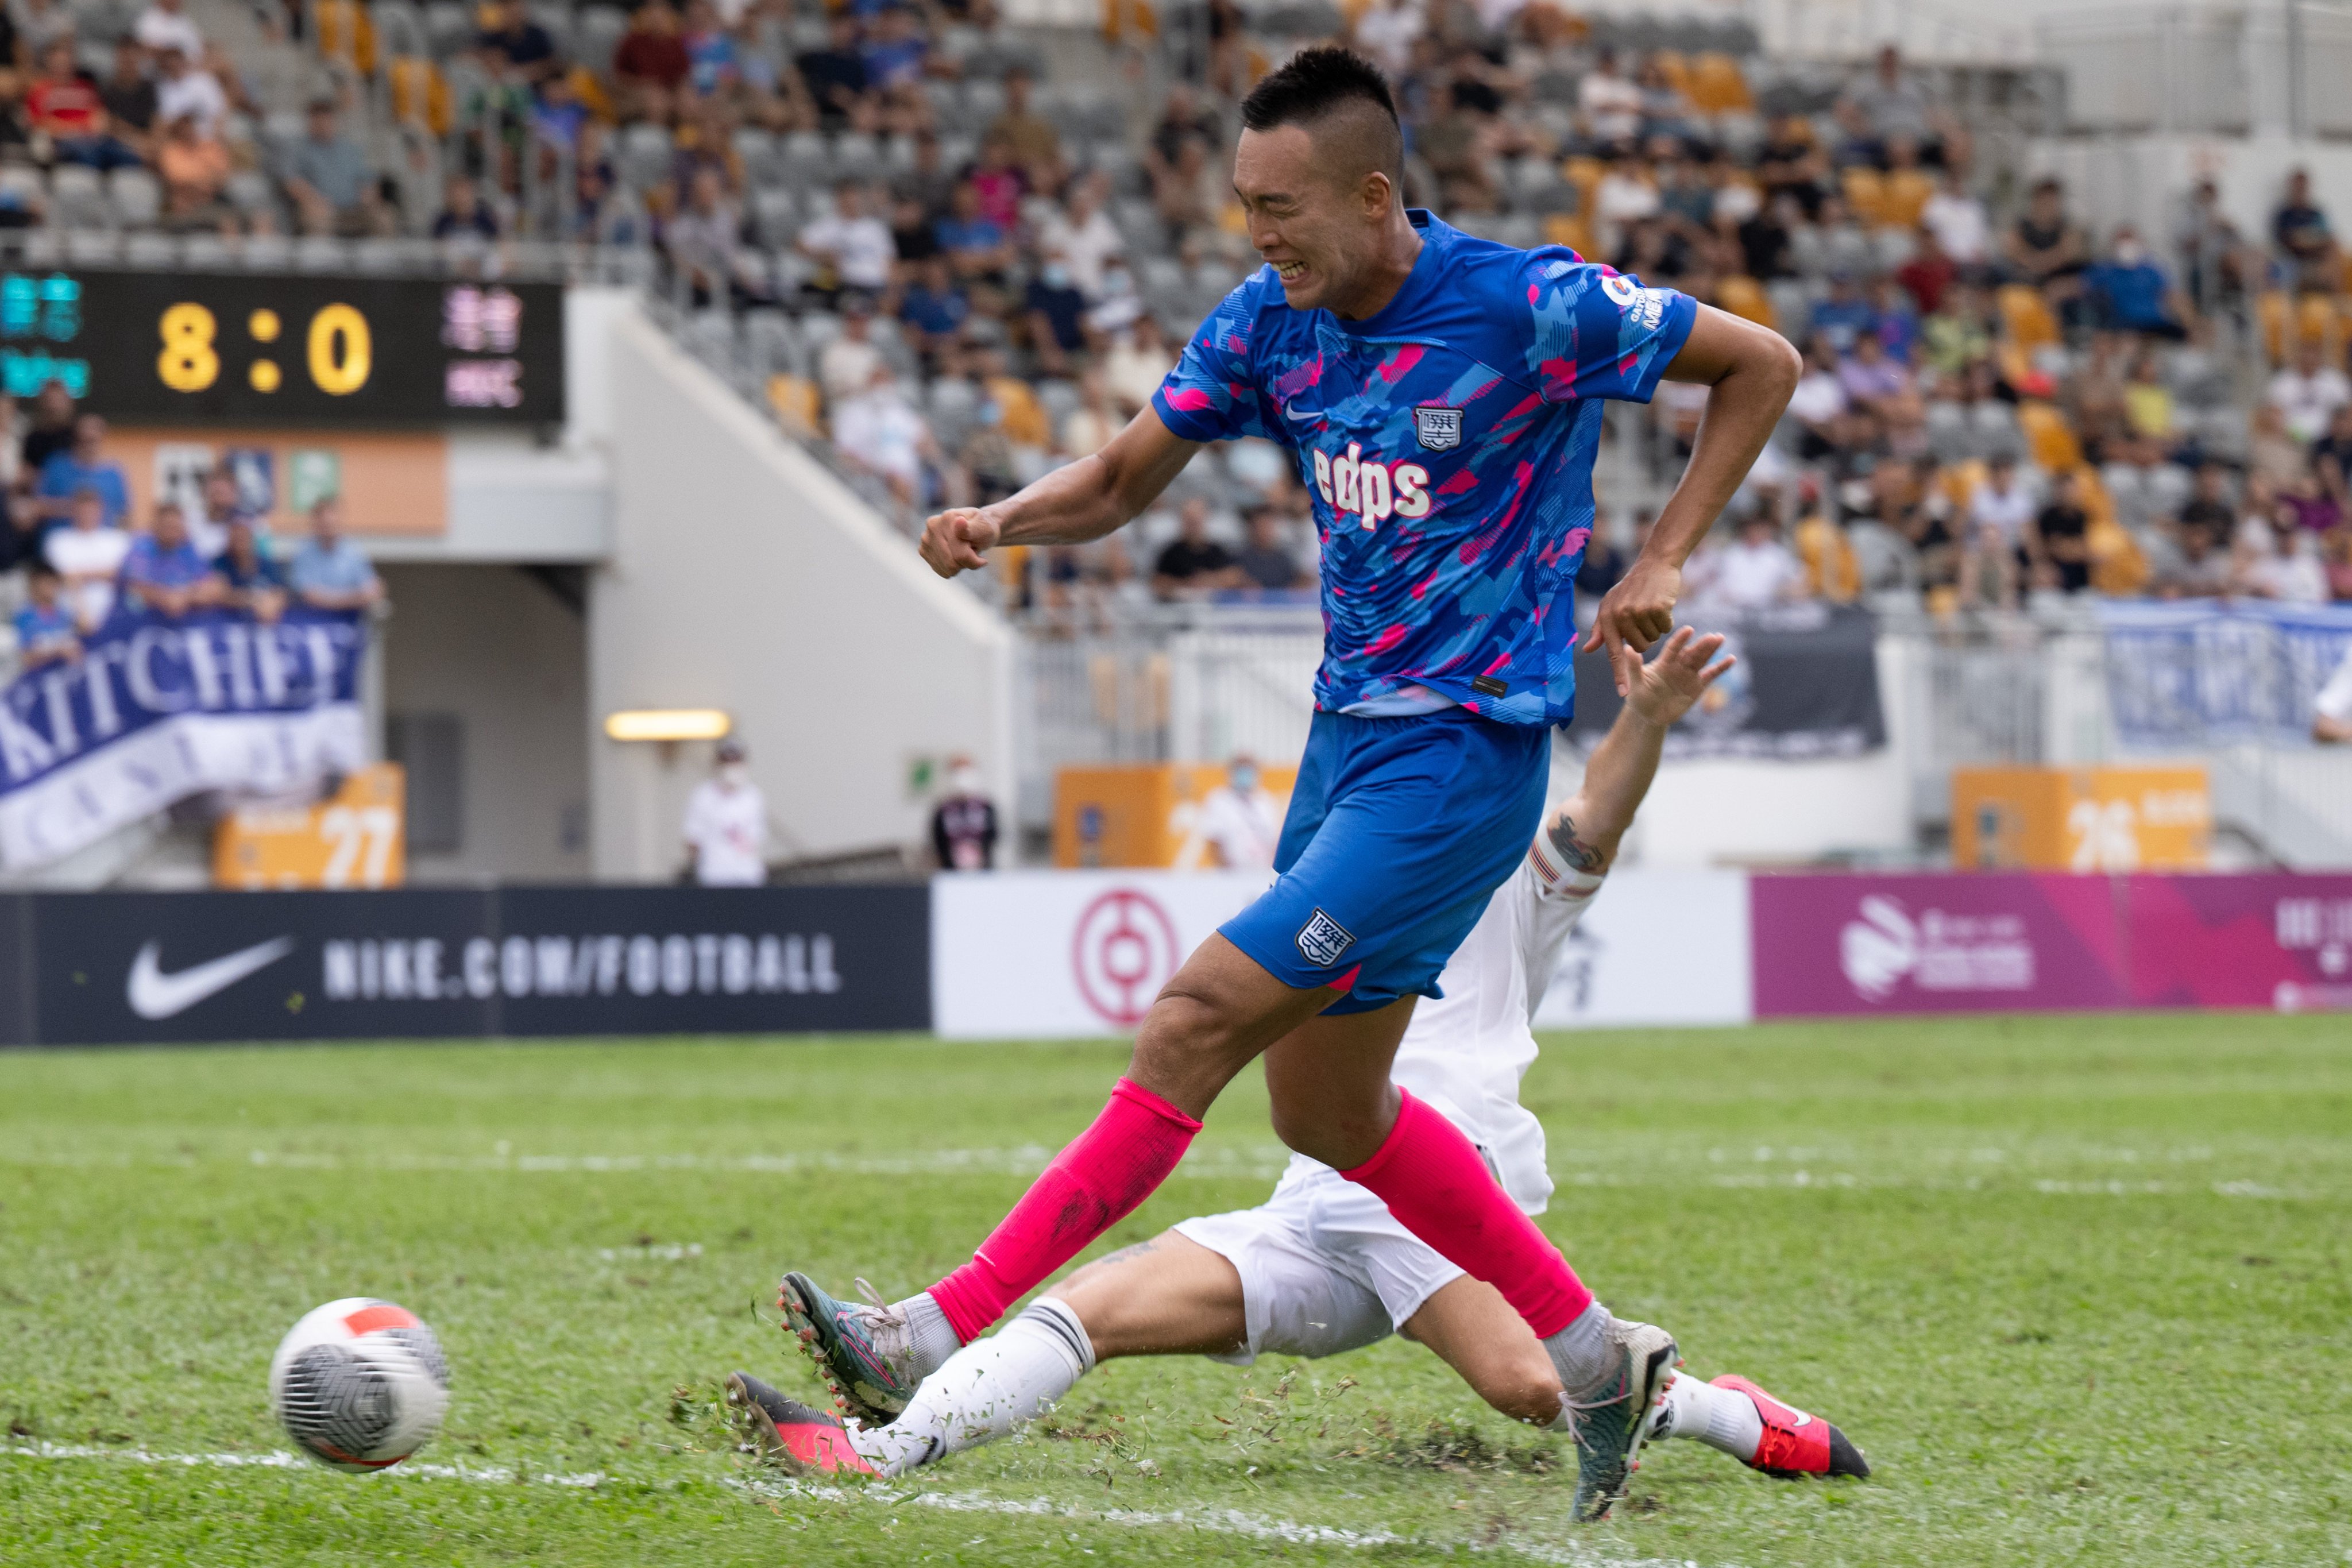 Kim Shin-wook has made only six appearances this season, leaving Kitchee interim head coach Kim Dong-jin unclear over the player’s future. Photo: HKFA